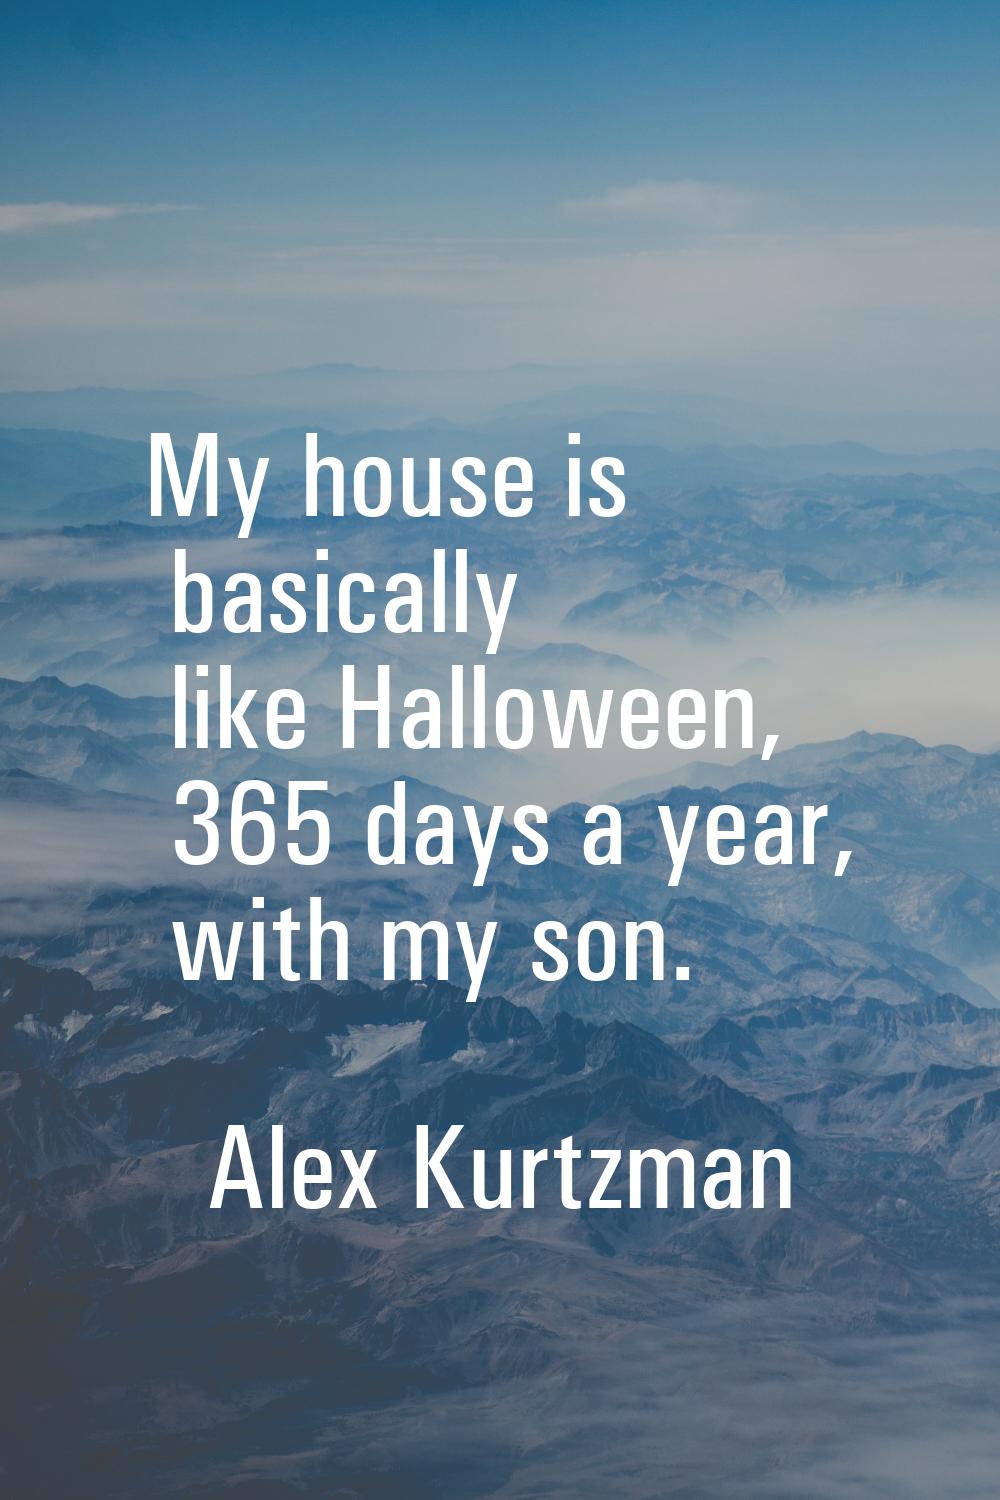 My house is basically like Halloween, 365 days a year, with my son.